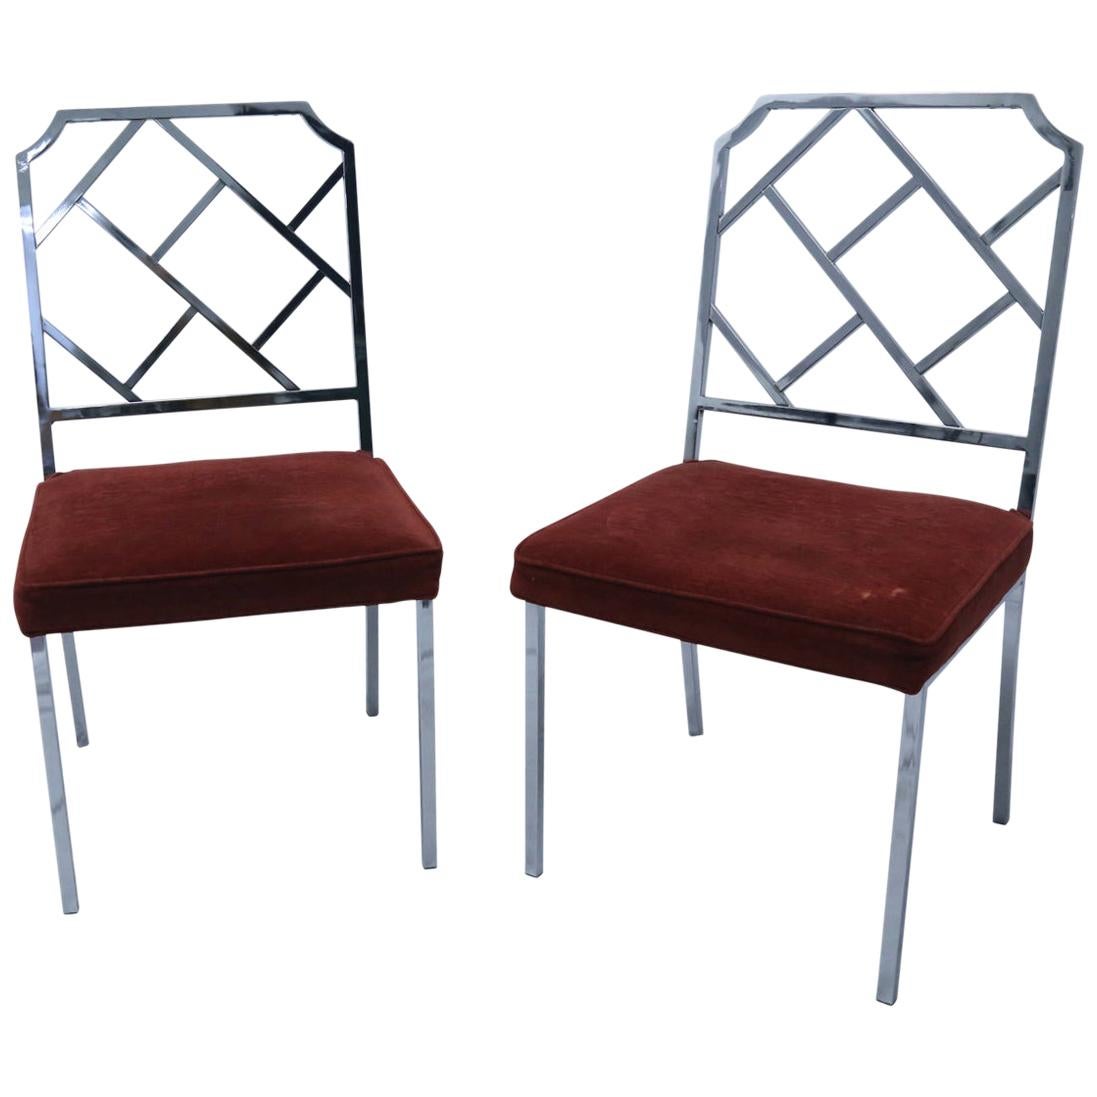 Pair of Hollywood Regency Stainless Chippendale Chairs with Velvet Seats